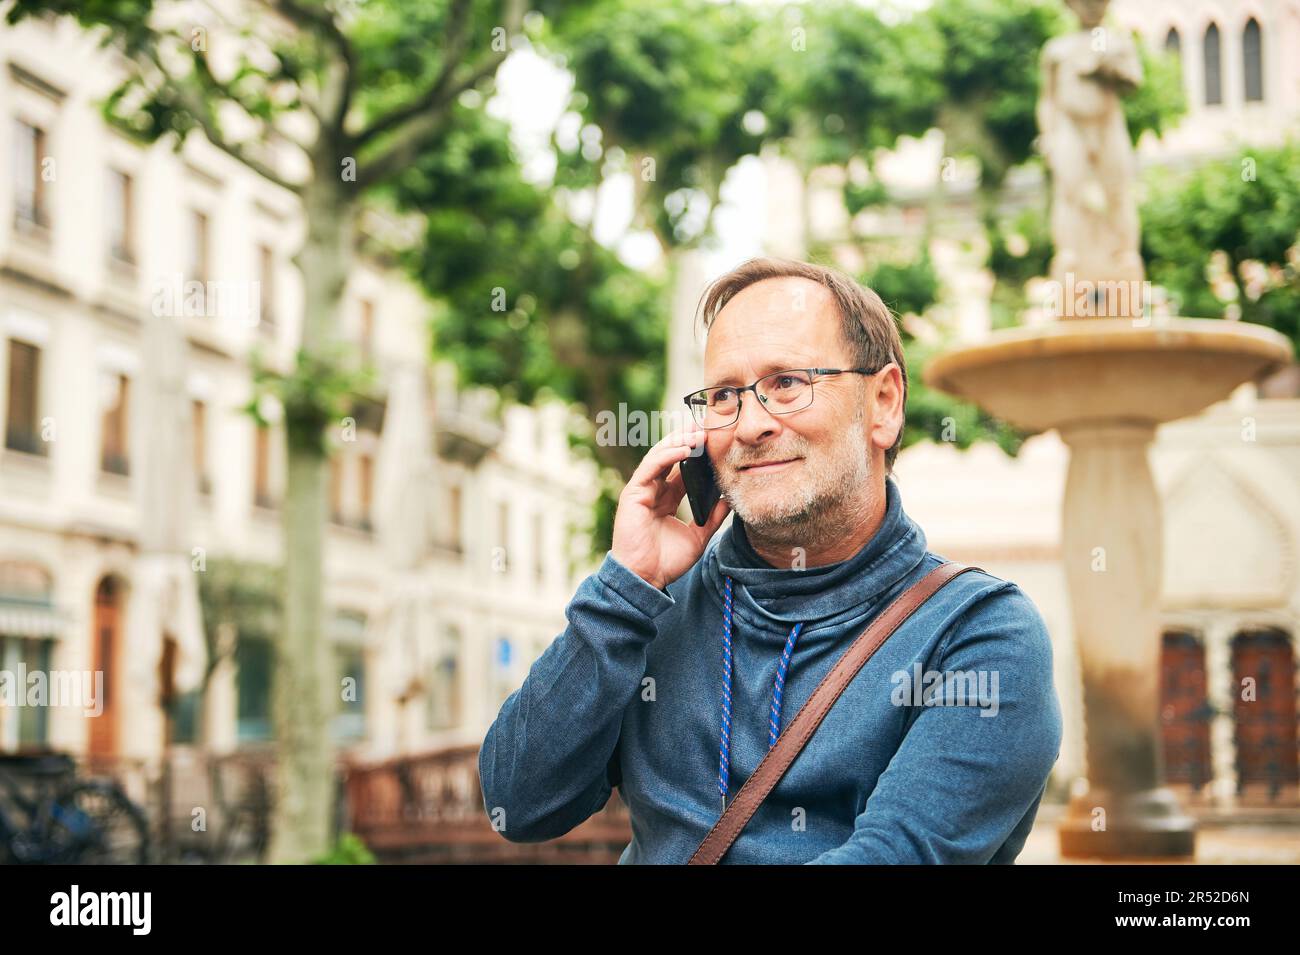 Outdoor portrait of middle age man talking on the phone, wearing glasses and blue sweatshirt, holding smartphone next to ear Stock Photo